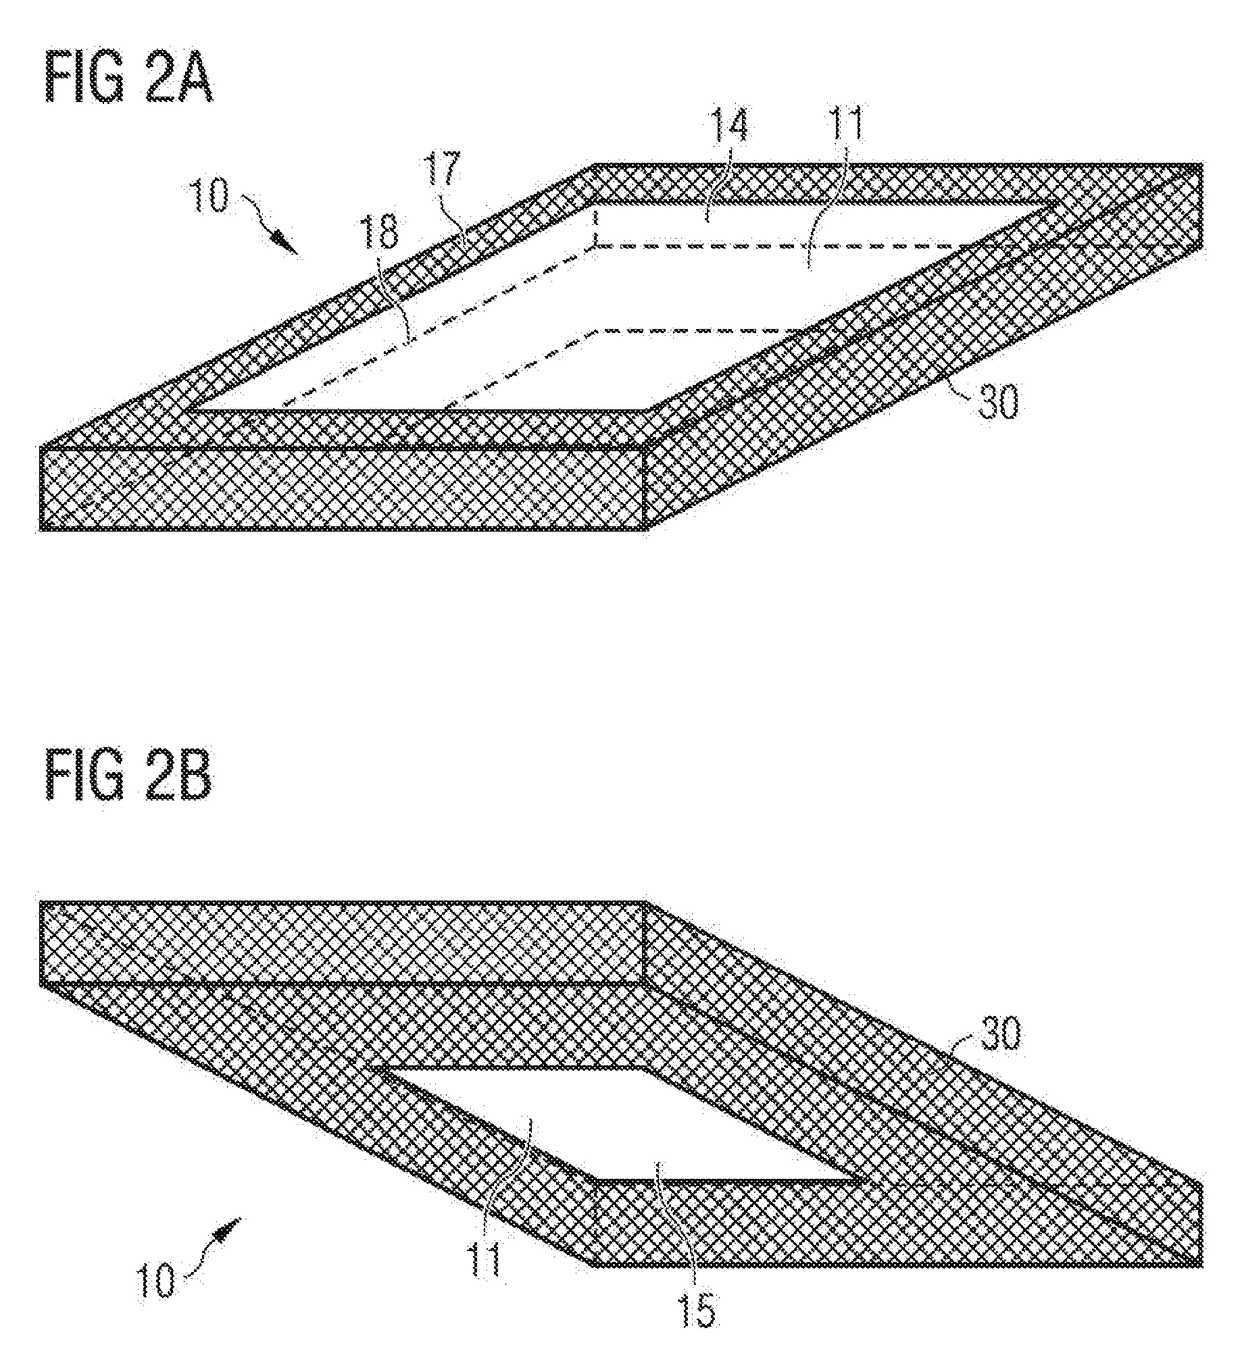 Display arrangement and method for fabrication of a display arrangement